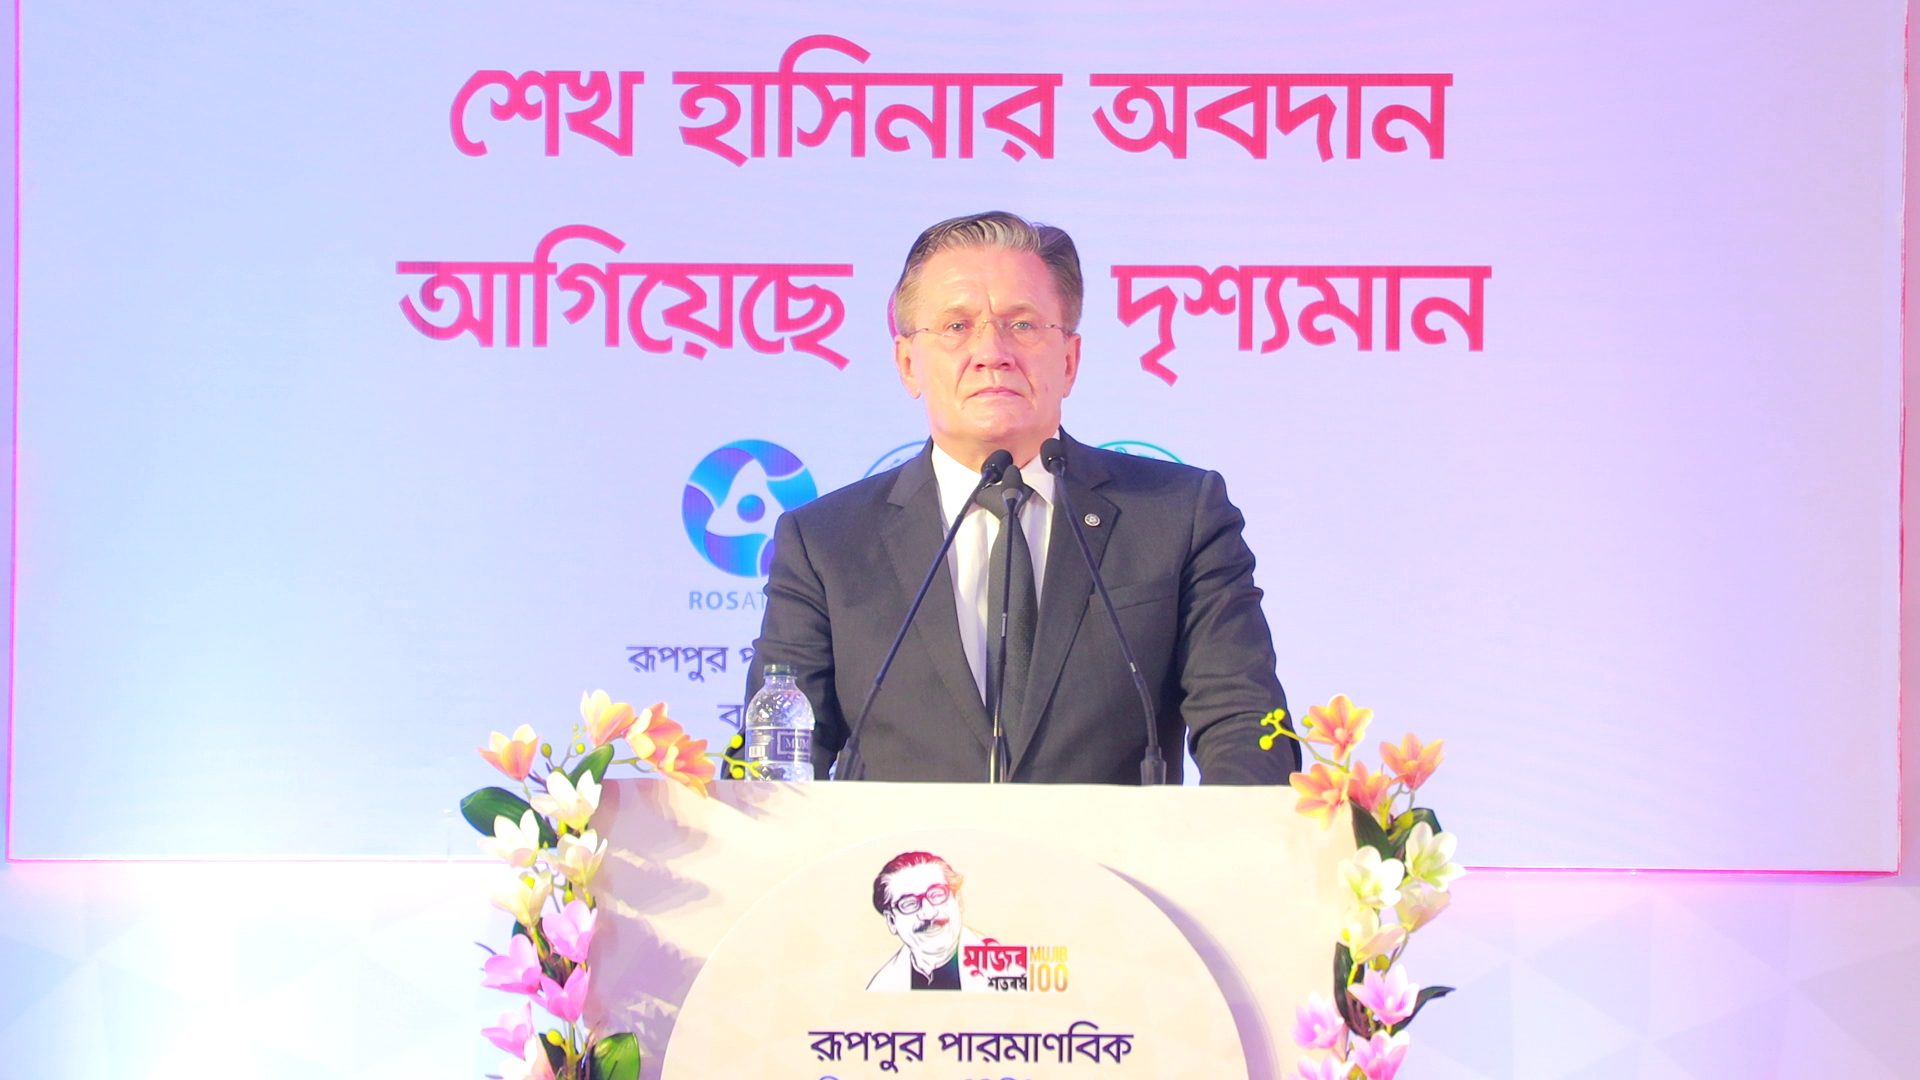 Alexey Likhachev, Rosatom Director General, came to Bangladesh with a working visit